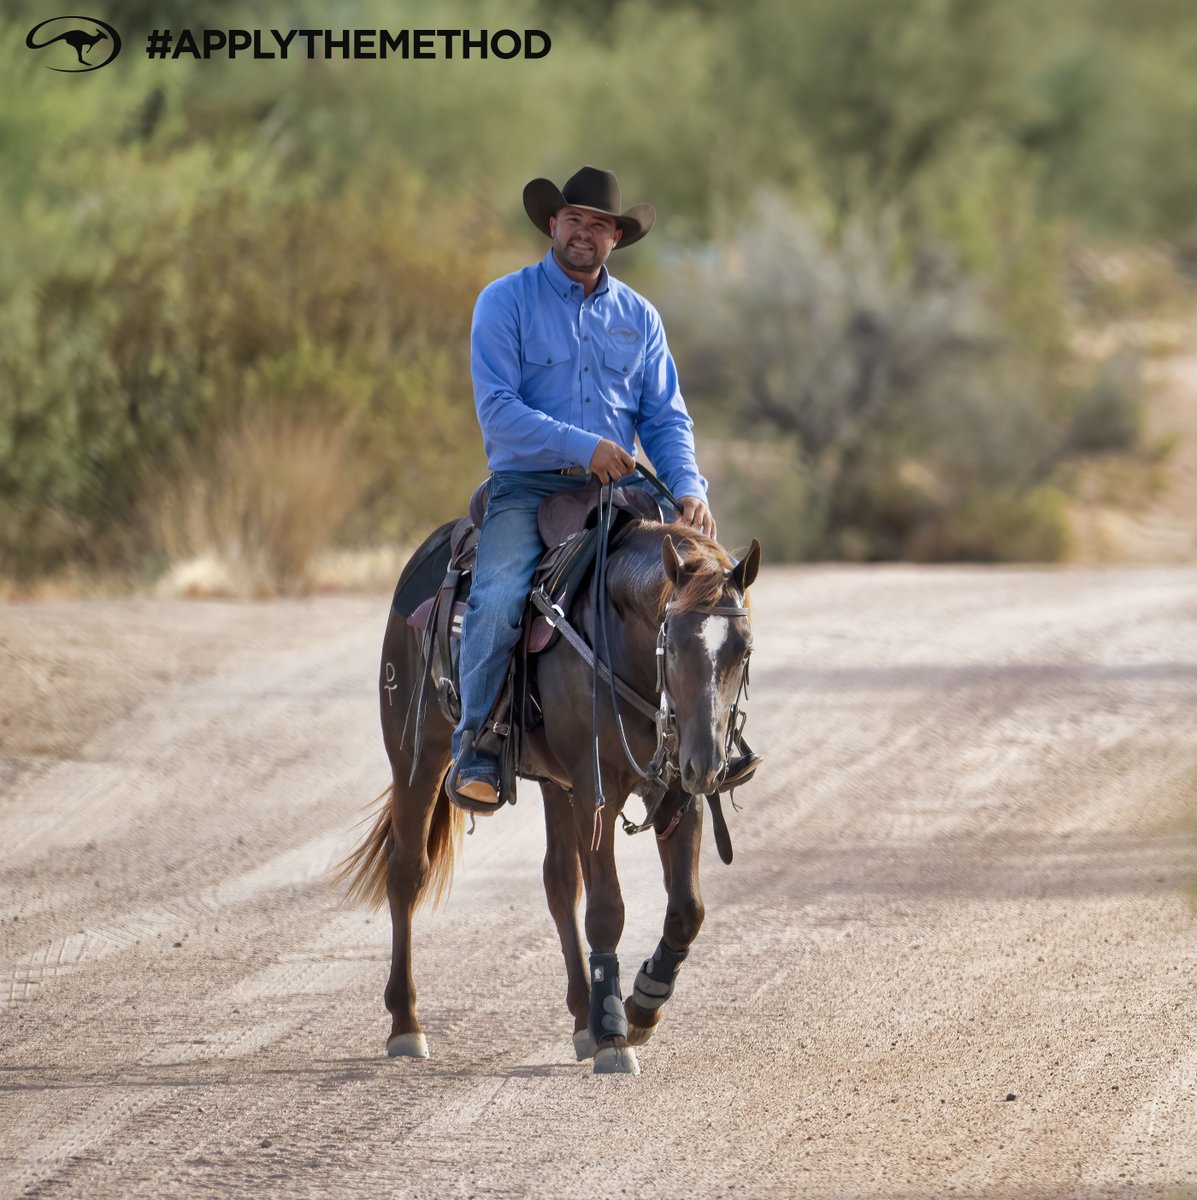 With horsemanship, there is no final destination. Every day is a new chance to learn something.
𝗣𝗿𝗼𝗳𝗲𝘀𝘀𝗶𝗼𝗻𝗮𝗹 𝗖𝗹𝗶𝗻𝗶𝗰𝗶𝗮𝗻 𝗝𝗲𝗳𝗳 𝗗𝗮𝘃𝗶𝘀
certifiedclinician.com/clinician/jeff…
#ApplyTheMethod